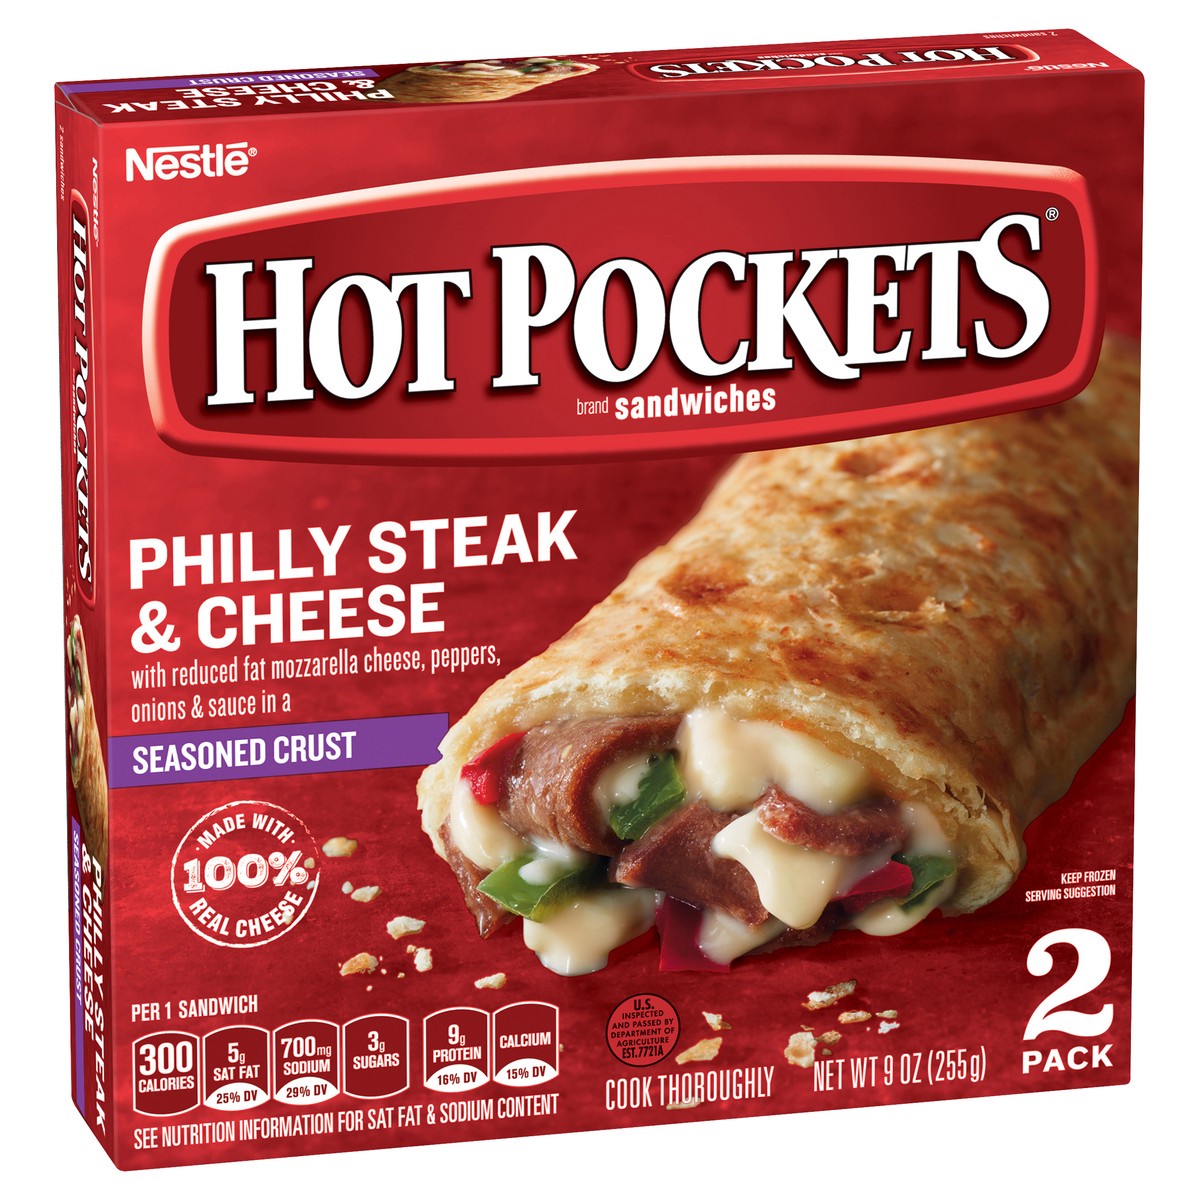 slide 2 of 9, Hot Pockets Philly Steak & Cheese Frozen Snacks in a Seasoned Crust, Philly Cheesesteak Made with Real Reduced Fat Mozzarella Cheese, 2 Count Frozen Sandwiches, 9 oz